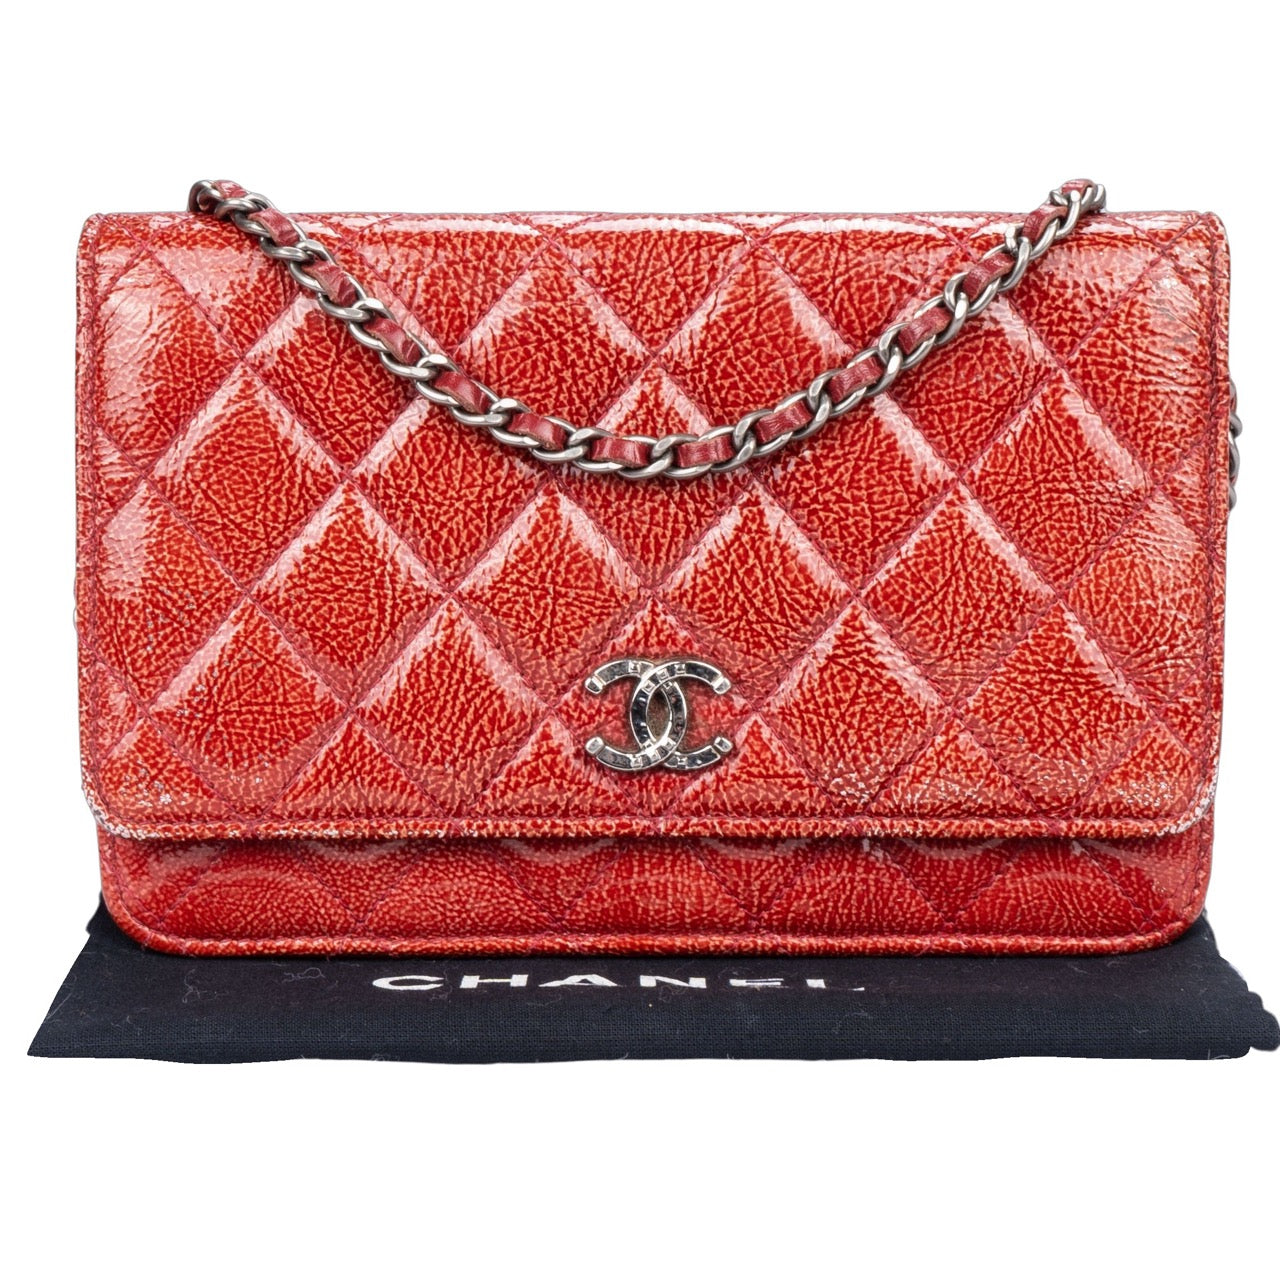 Chanel Soft Leather Wallet On Chain Crossbody Bag